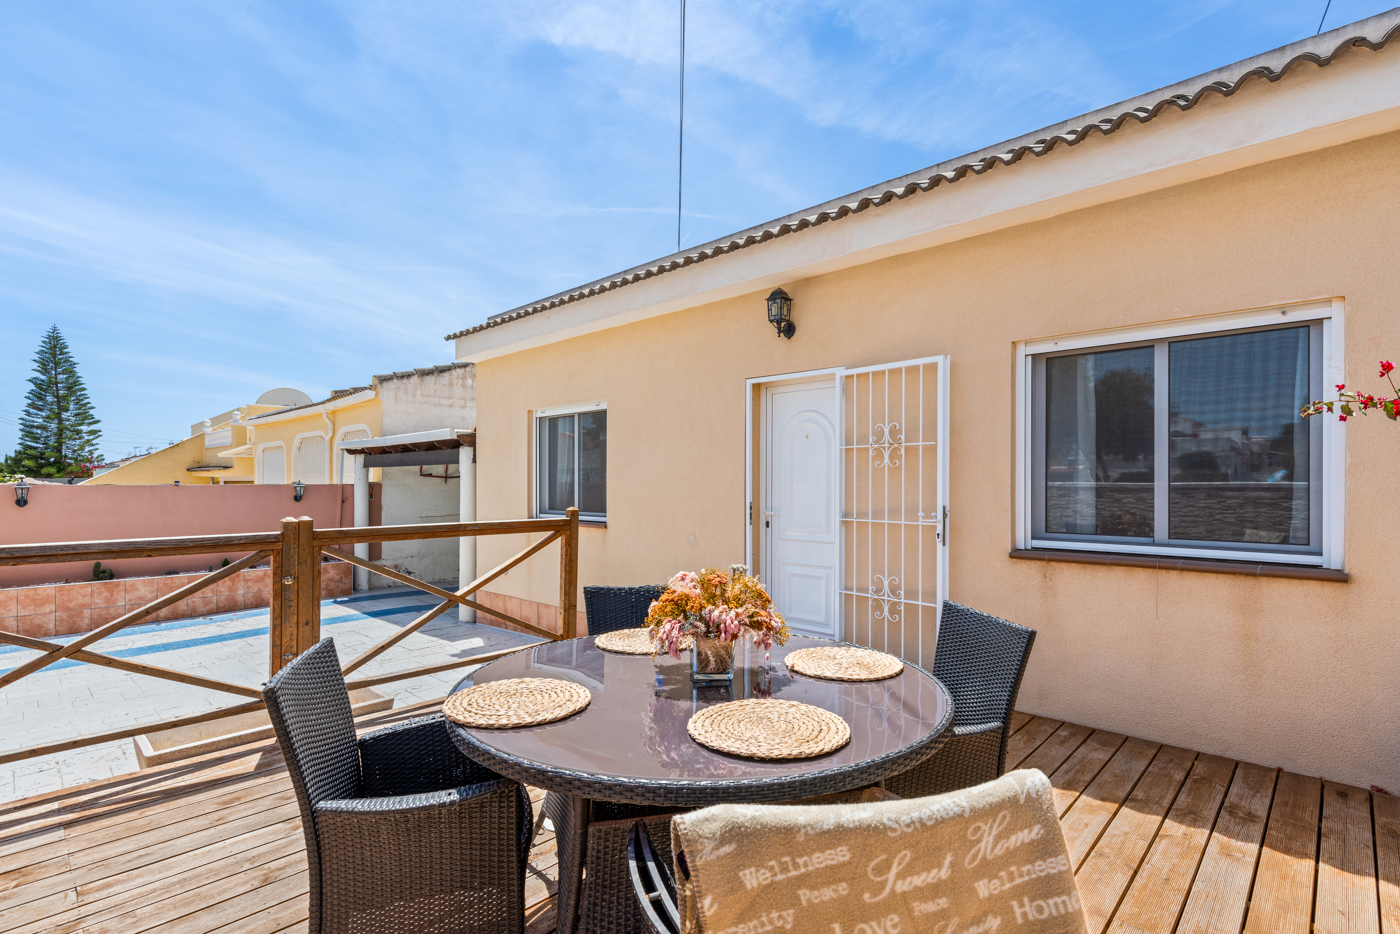 3 Bed, 1 Bath, HouseFor Sale, Torrevieja, Alicante